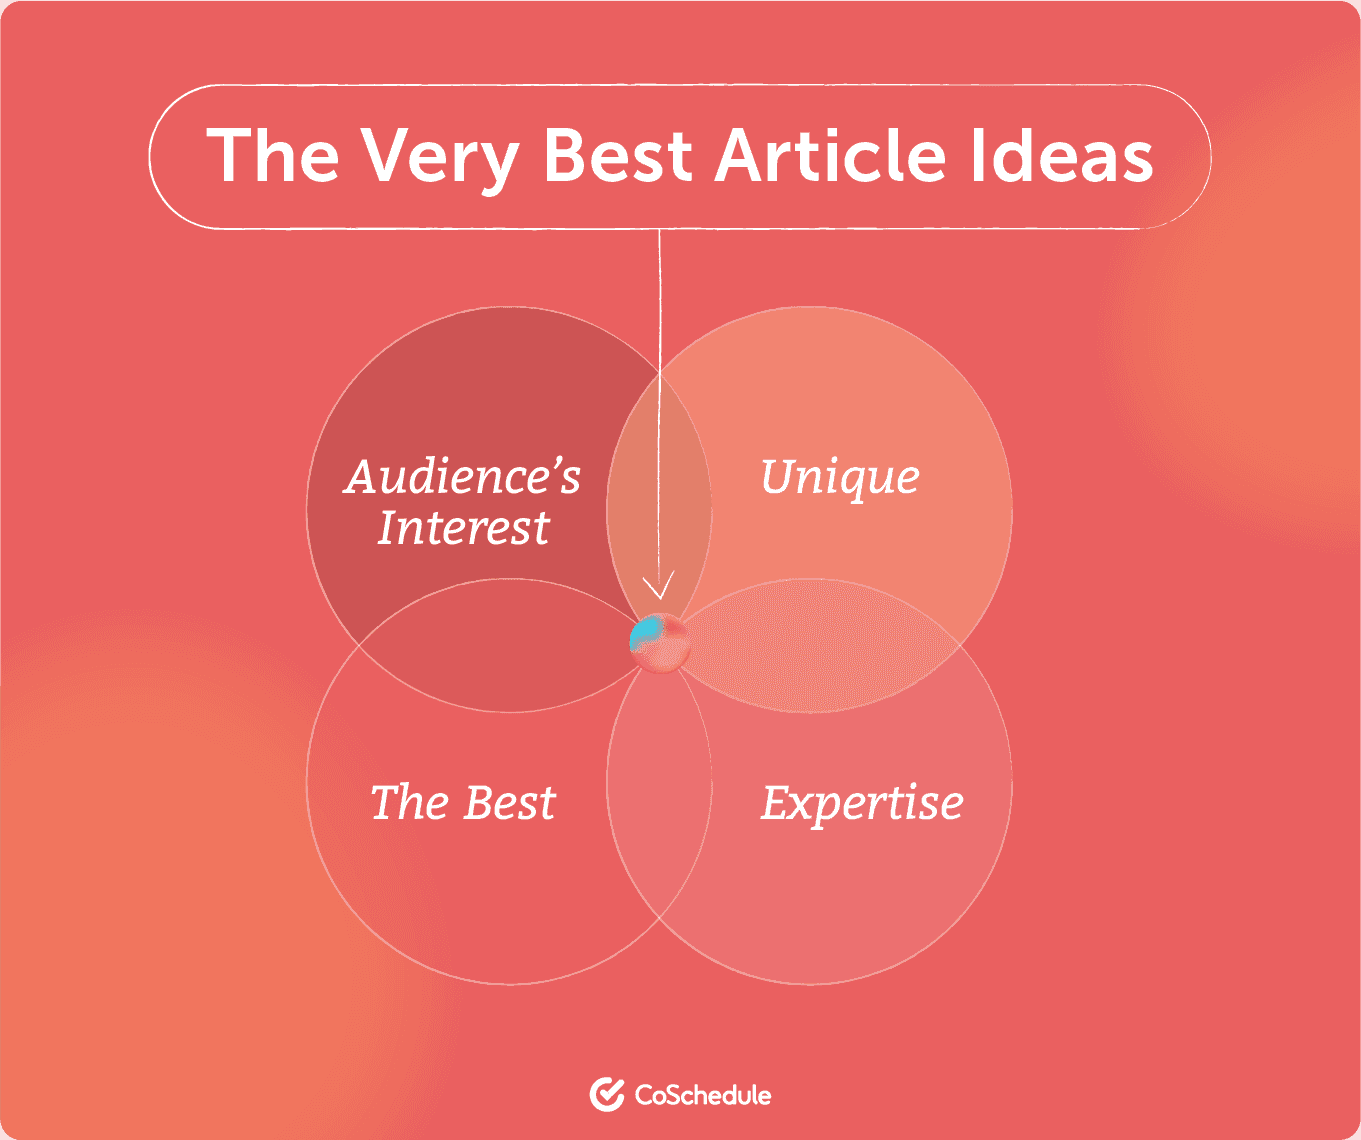 The very best article ideas